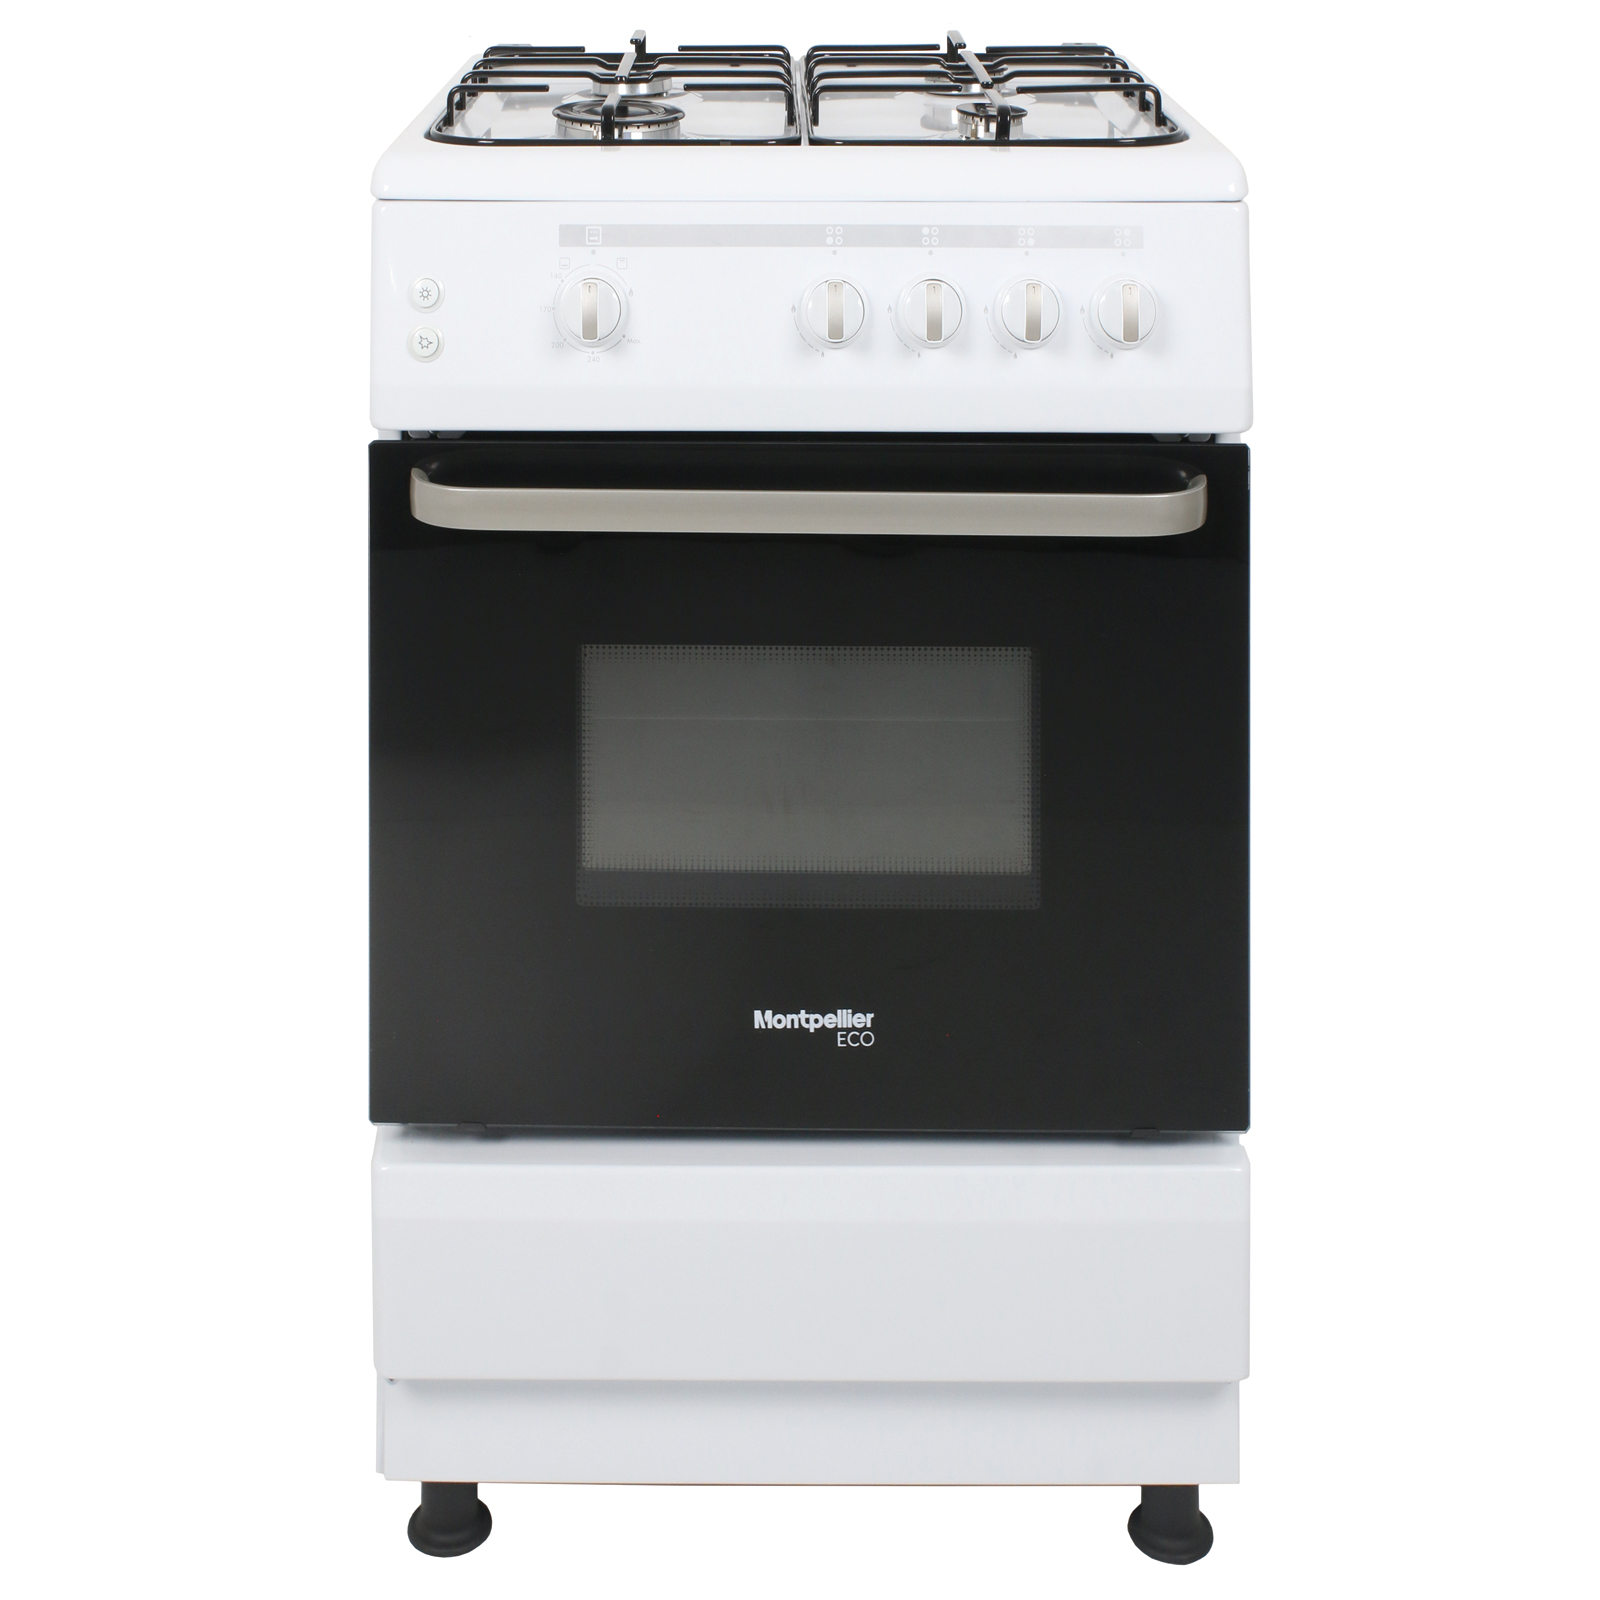 Image of Montpellier SCG60W 60cm Single Oven Gas Cooker in White 64 Litre